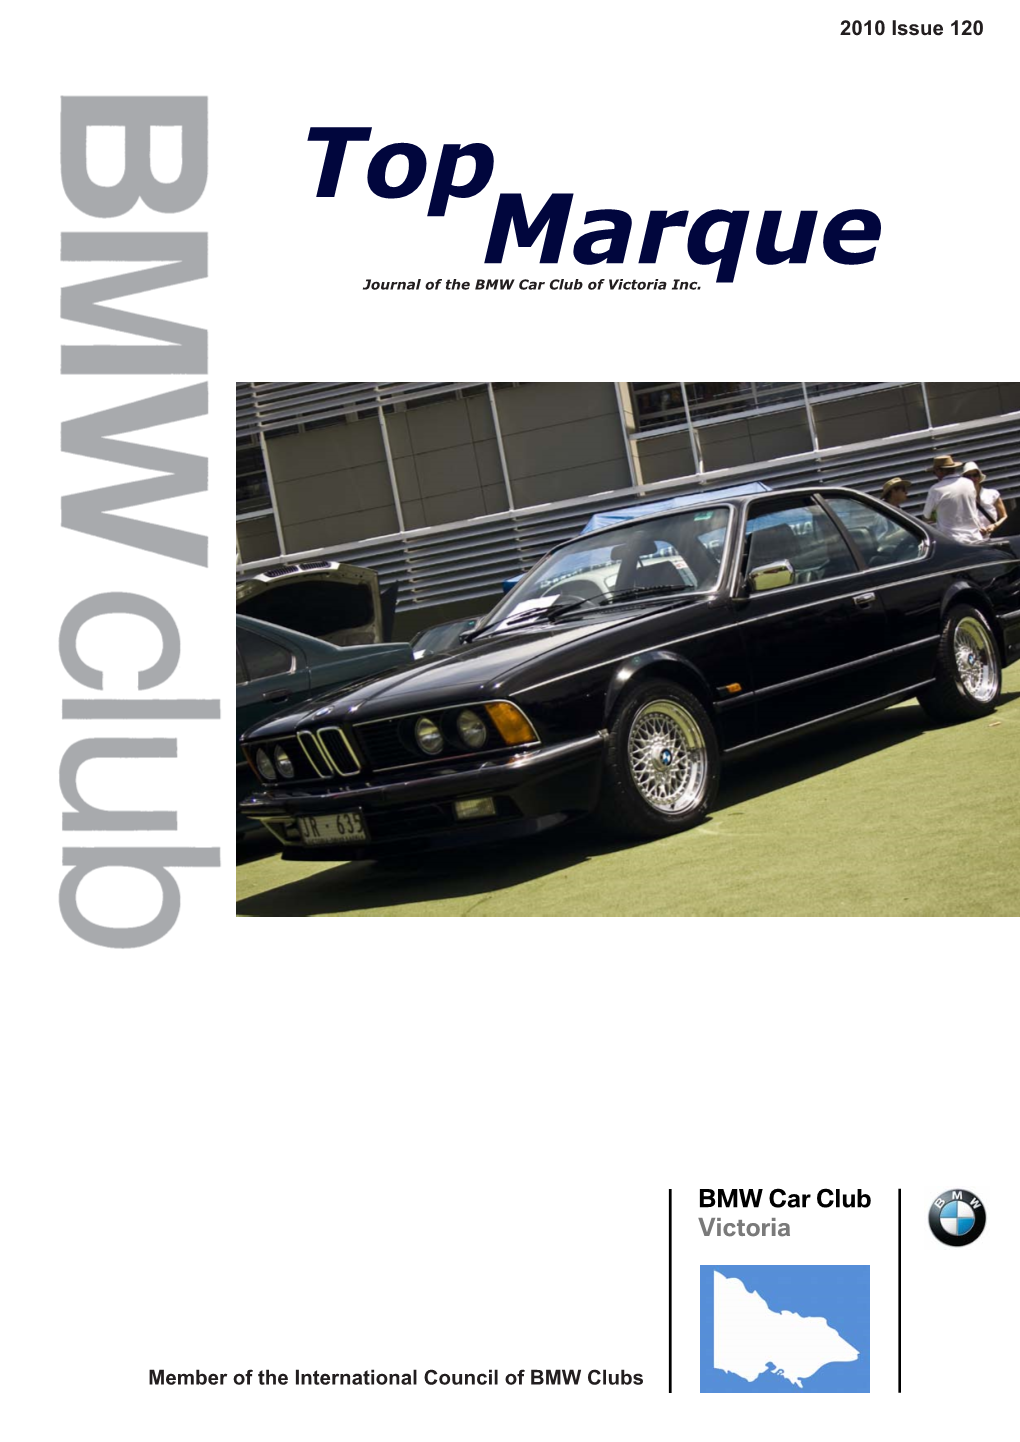 Issue 120 Top Marque Journal of the BMW Car Club of Victoria Inc